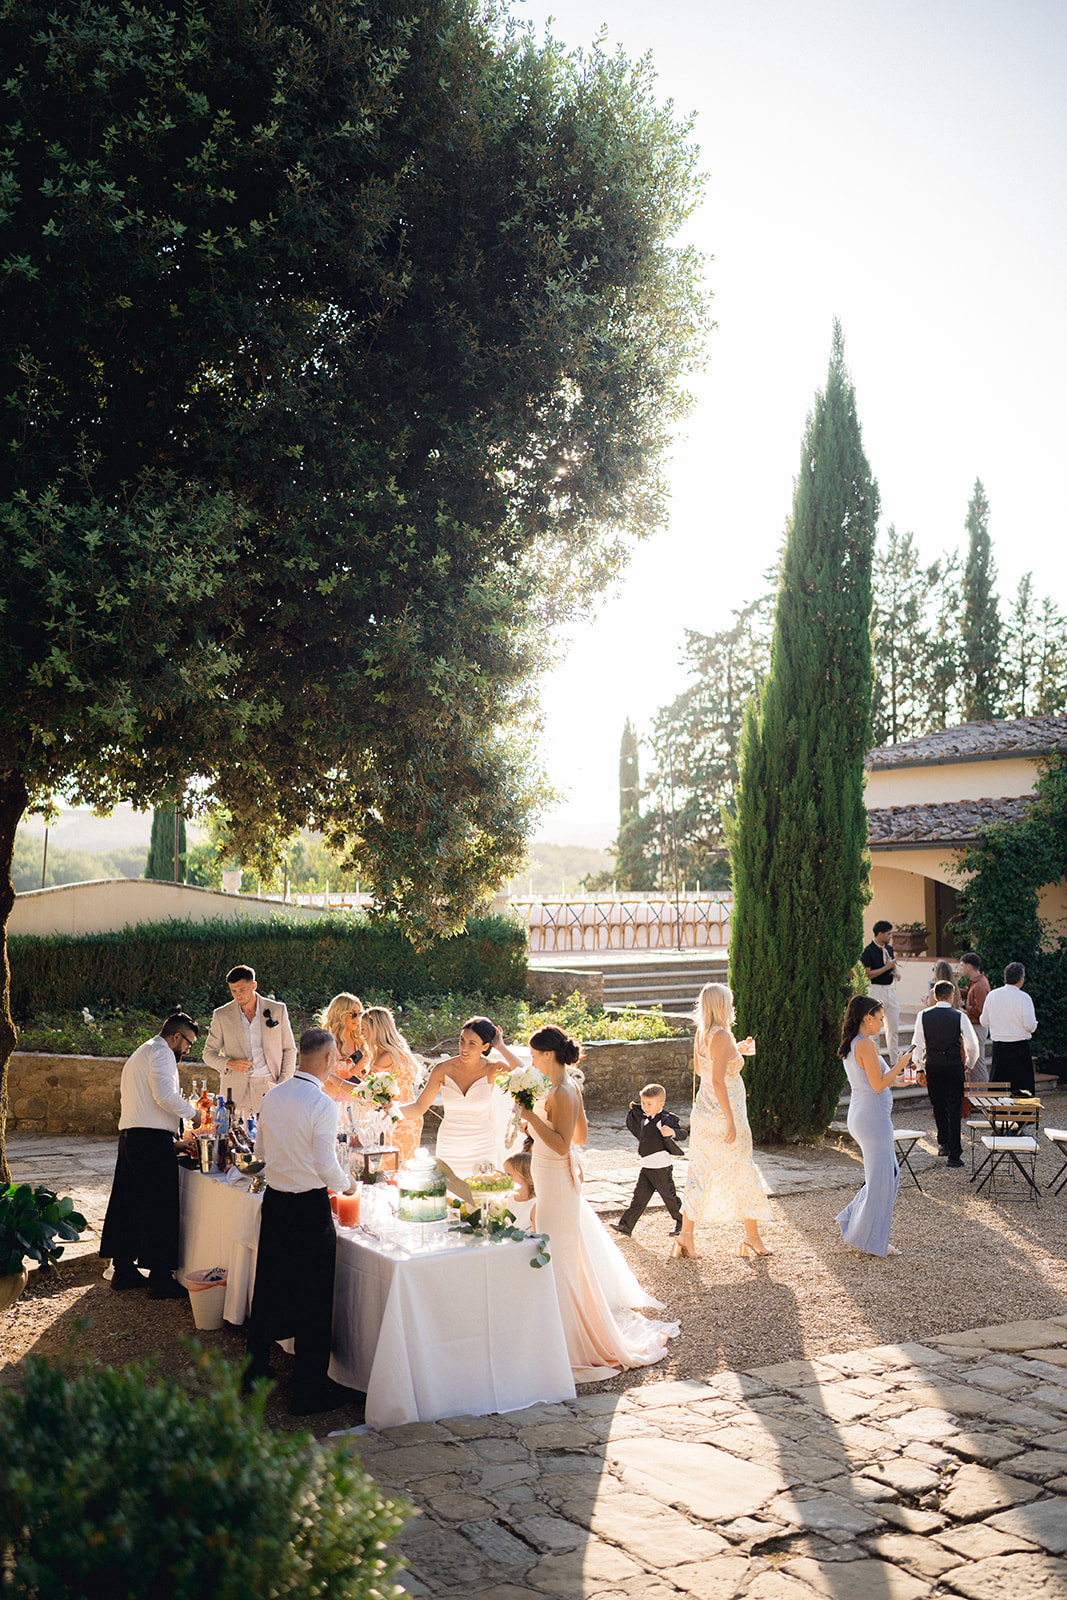 A wedding cocktail during the golden hour in Tuscany